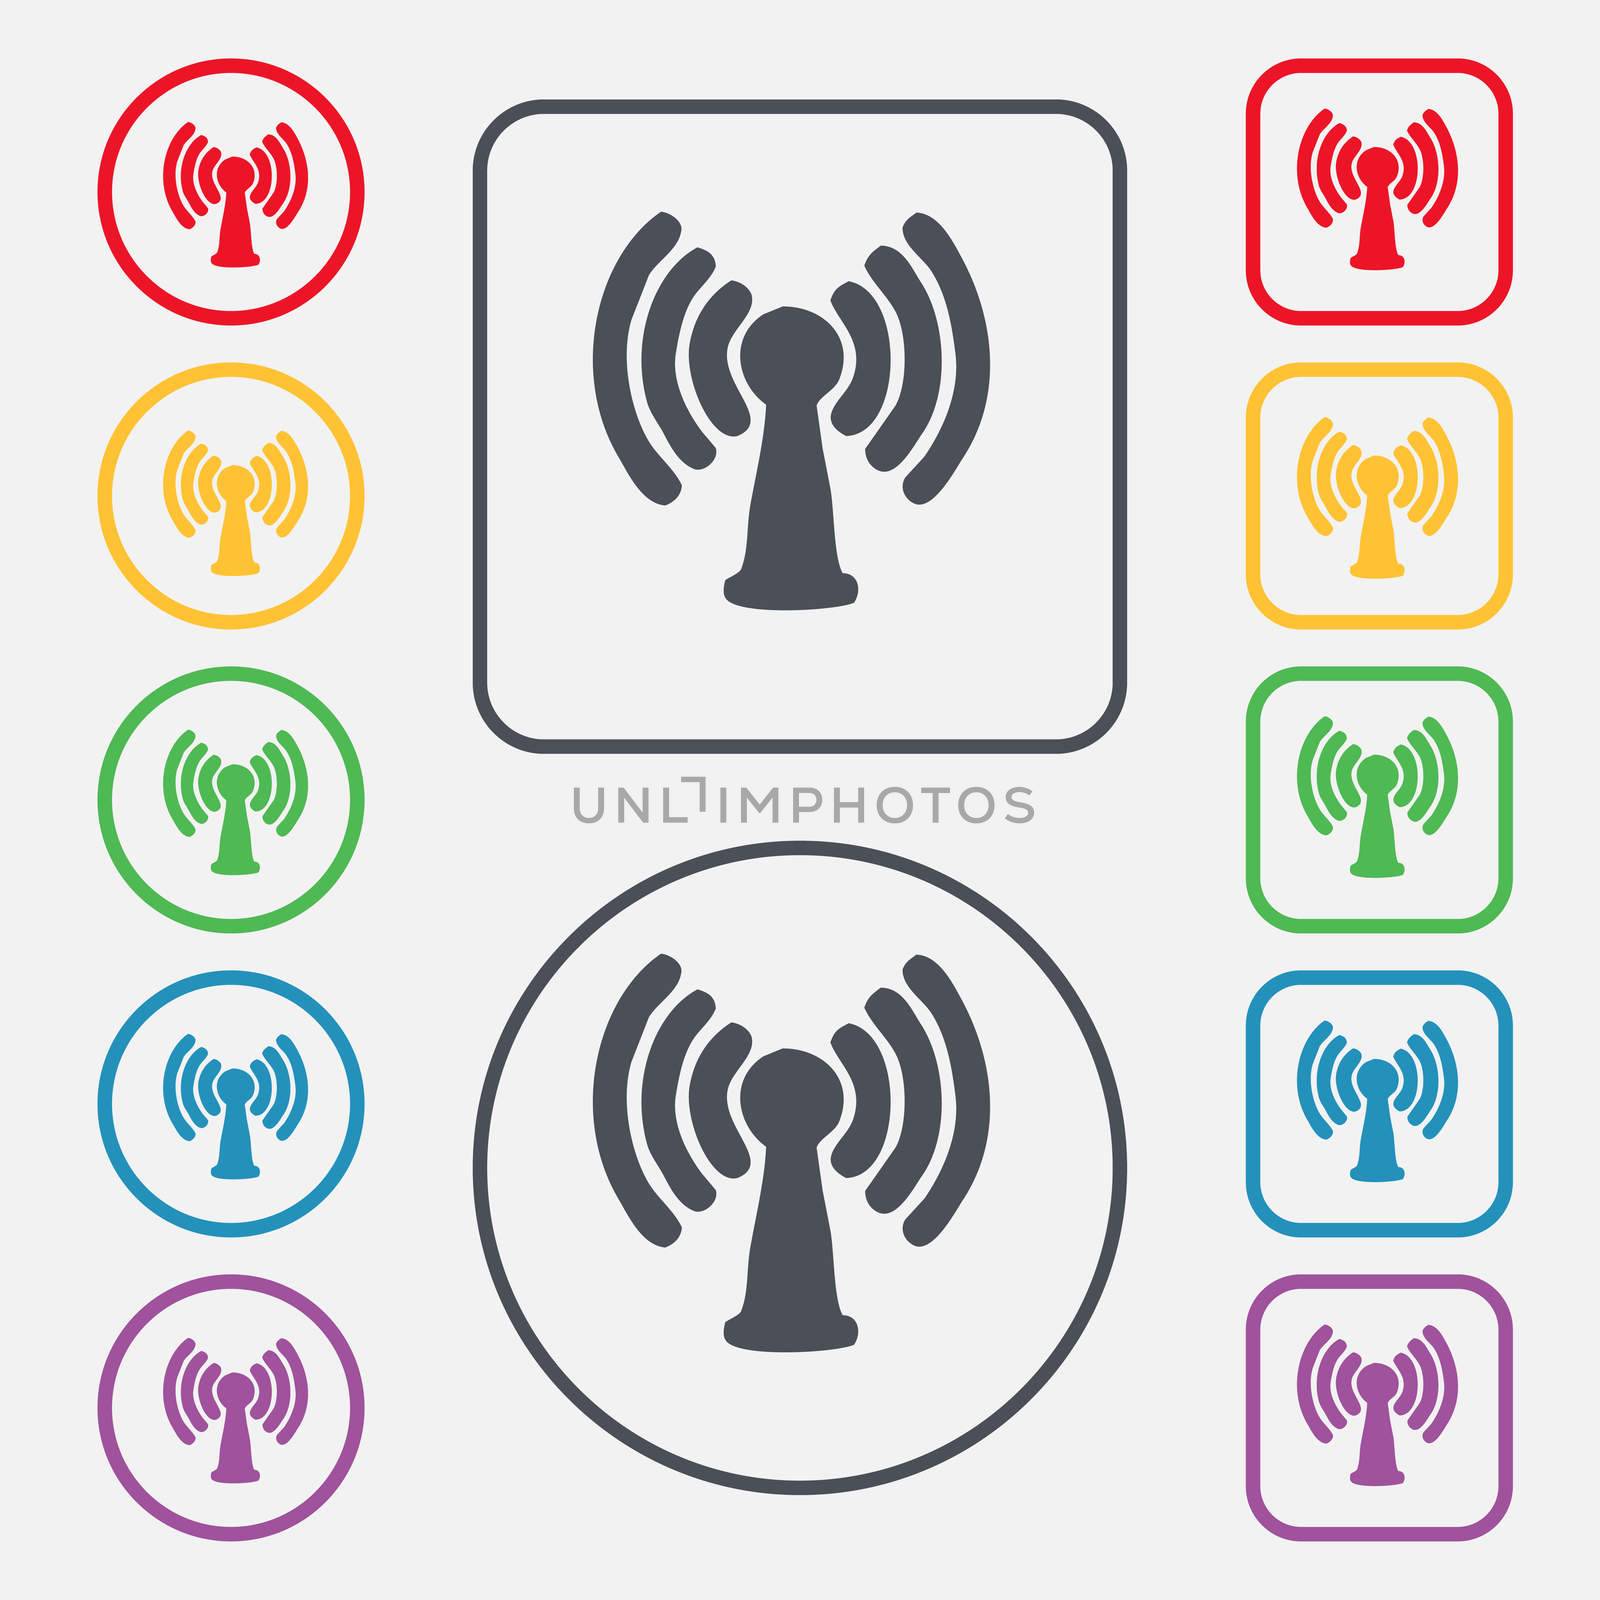 Wi-fi, internet icon sign. symbol on the Round and square buttons with frame. illustration